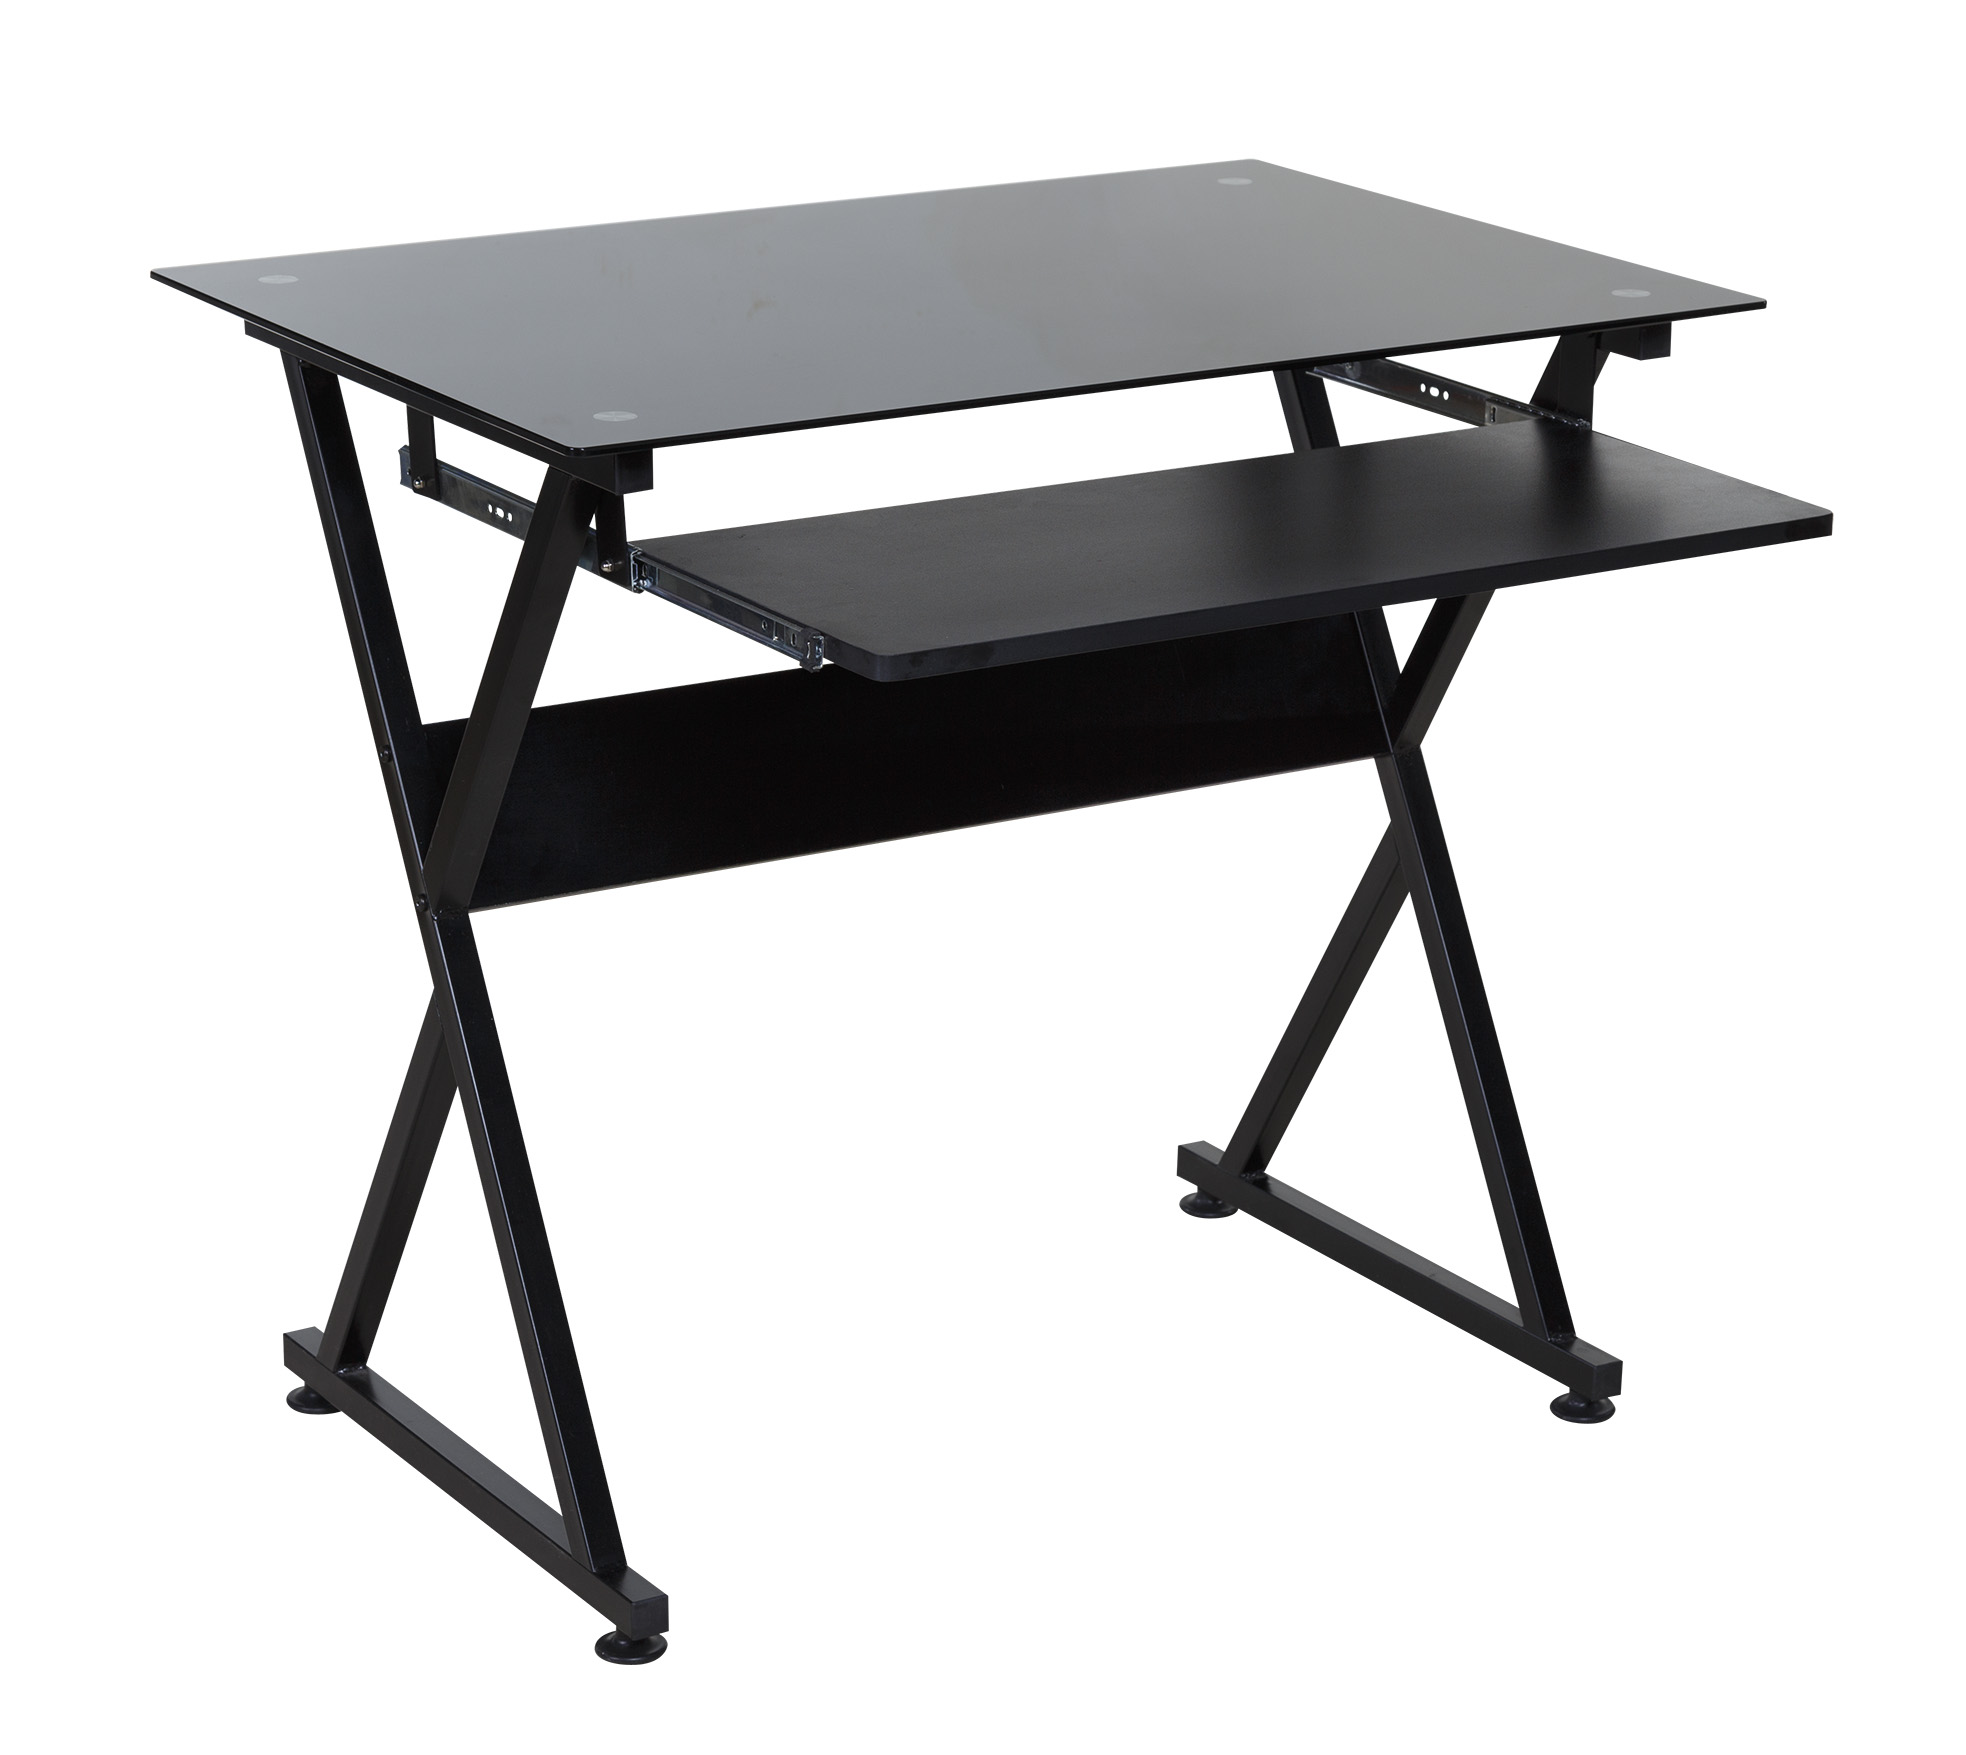 OneSpace 50-JN1205 Ultramodern Glass Computer Desk, with Pull-Out Keyboard Tray, Black - image 4 of 9